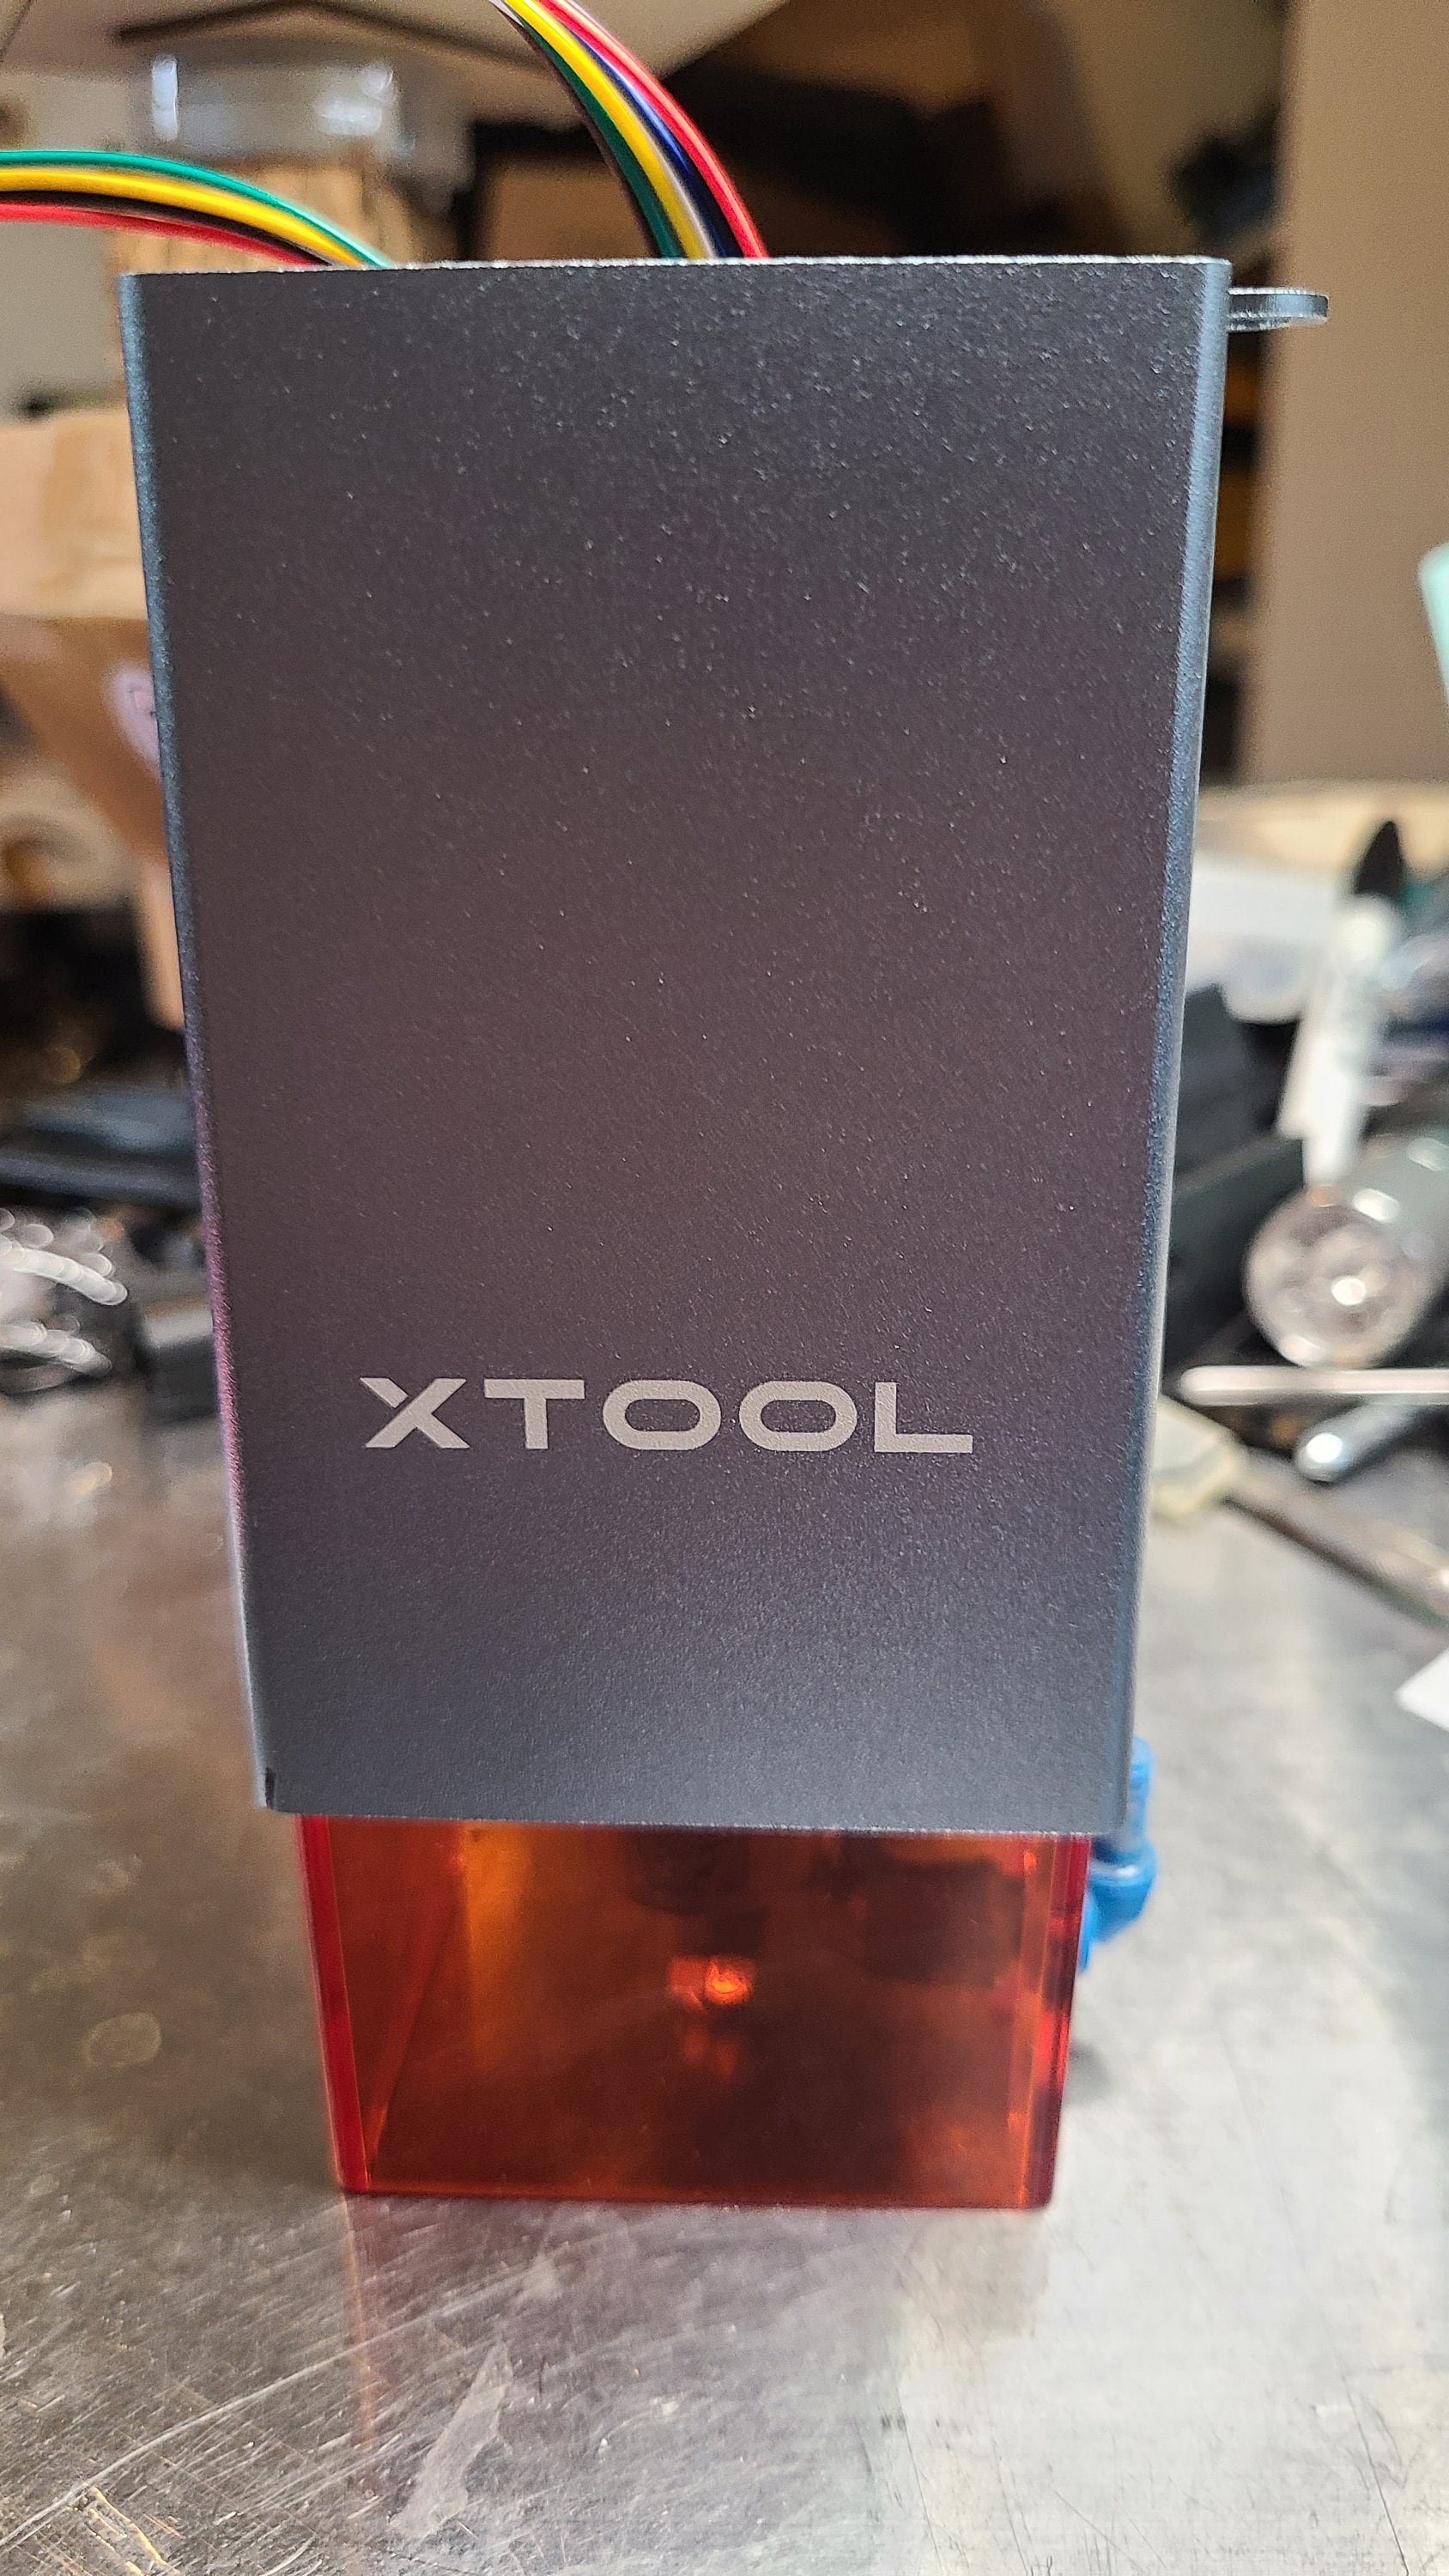 My full xTool S1 review--all about this 40W diode laser machine!